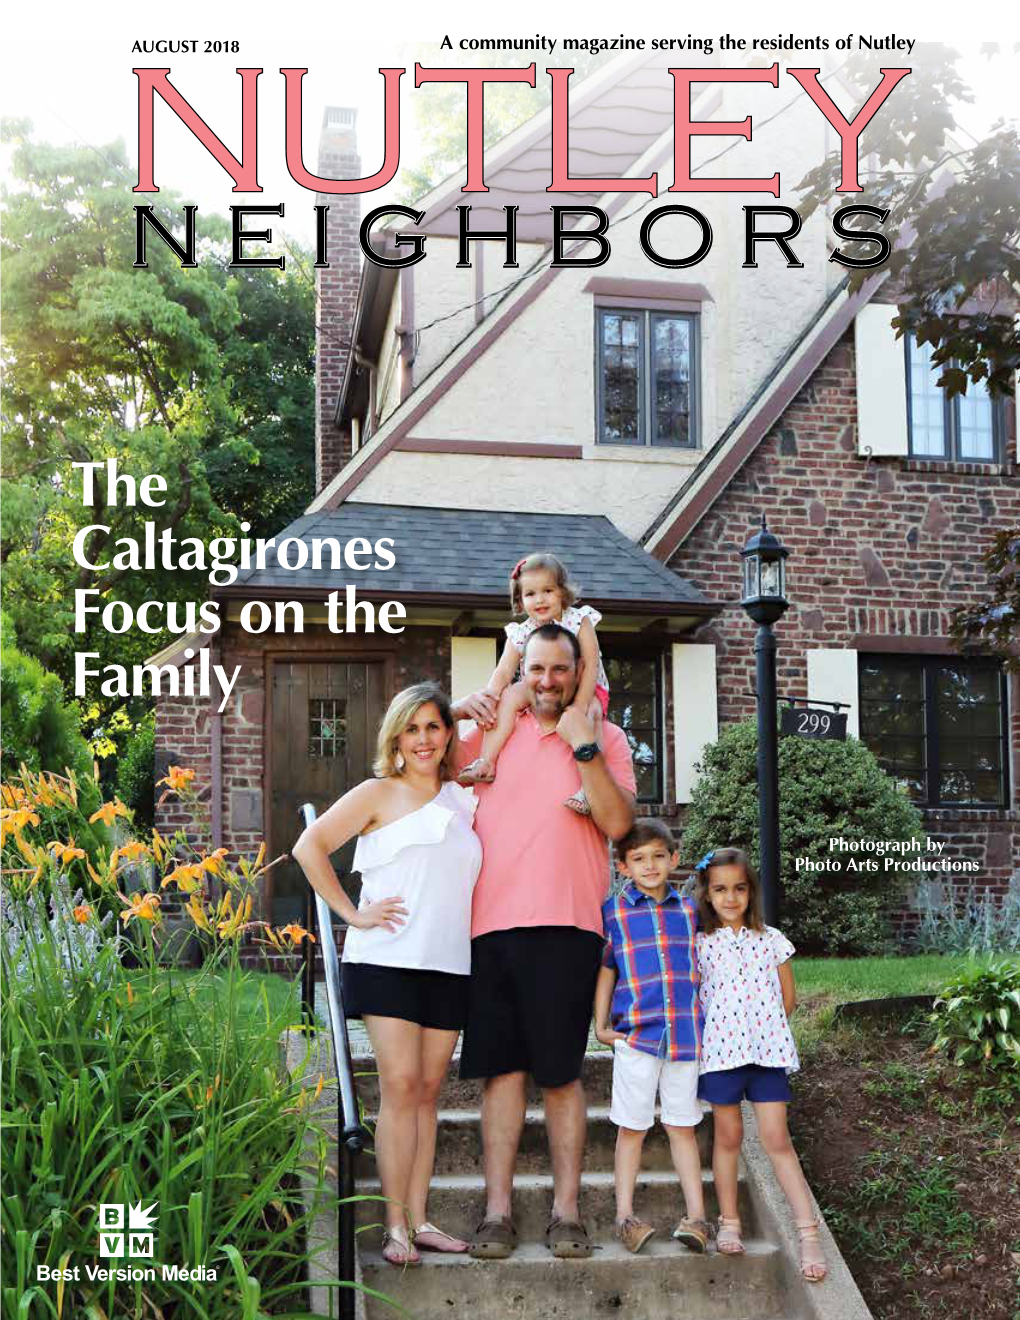 AUGUST 2018 a Community Magazine Serving the Residents of Nutley NUTLEY NEIGHBORS